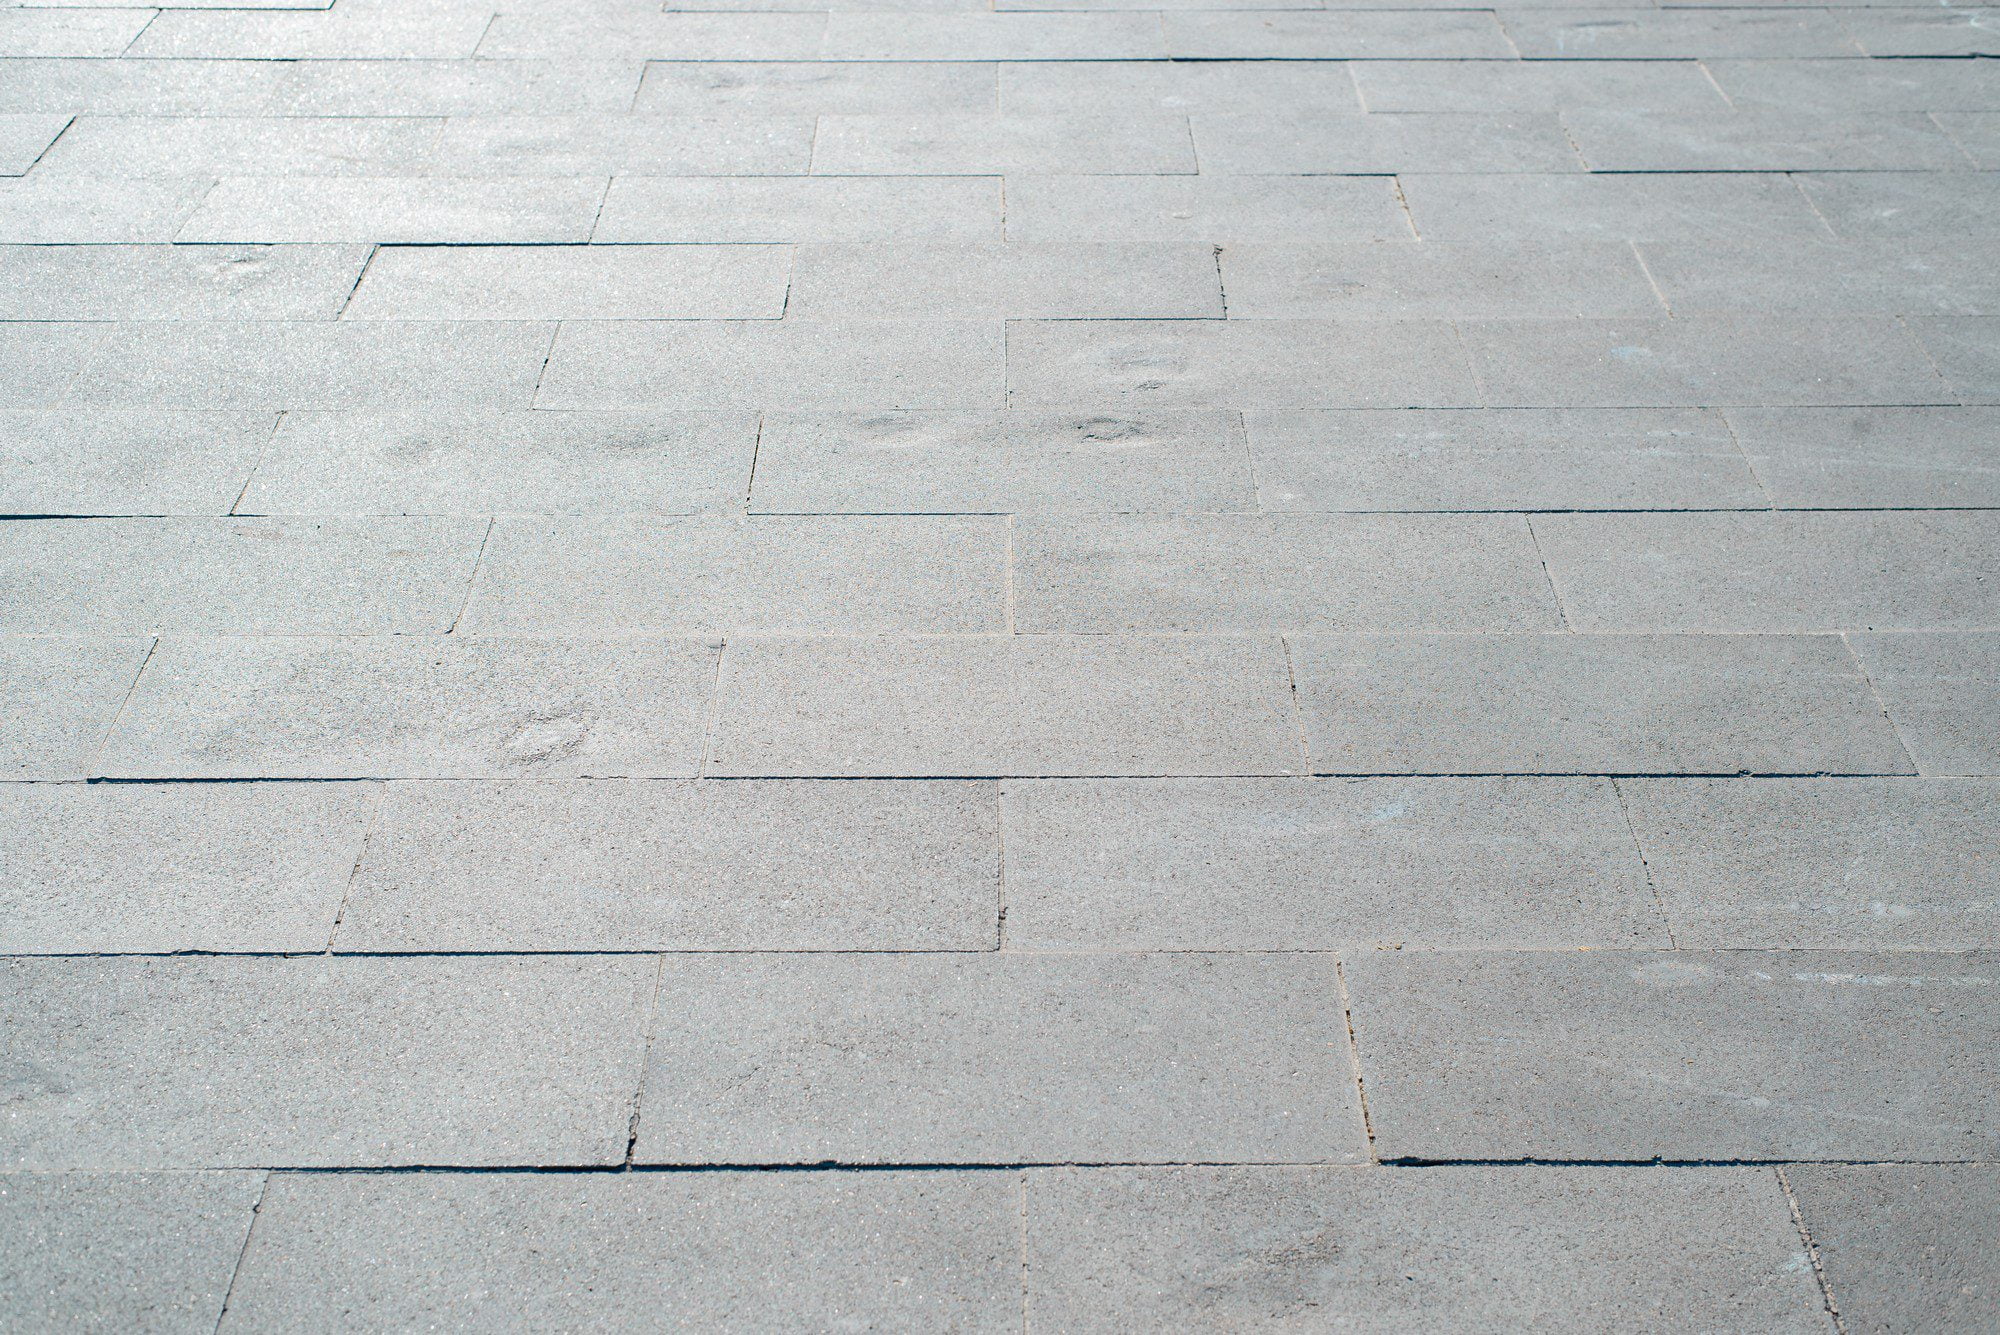 The image shows a paved surface consisting of uniform rectangular stone or concrete slabs arranged in a staggered pattern. The surface is flat and seems suitable for pedestrian traffic, indicating that it could be a section of a sidewalk, plaza, or other pedestrian area. The photo captures the texture and colour variations of the paving material under natural light, with shadows indicating a bright day. There are no discernible distinctive features or landmarks to indicate the specific location.